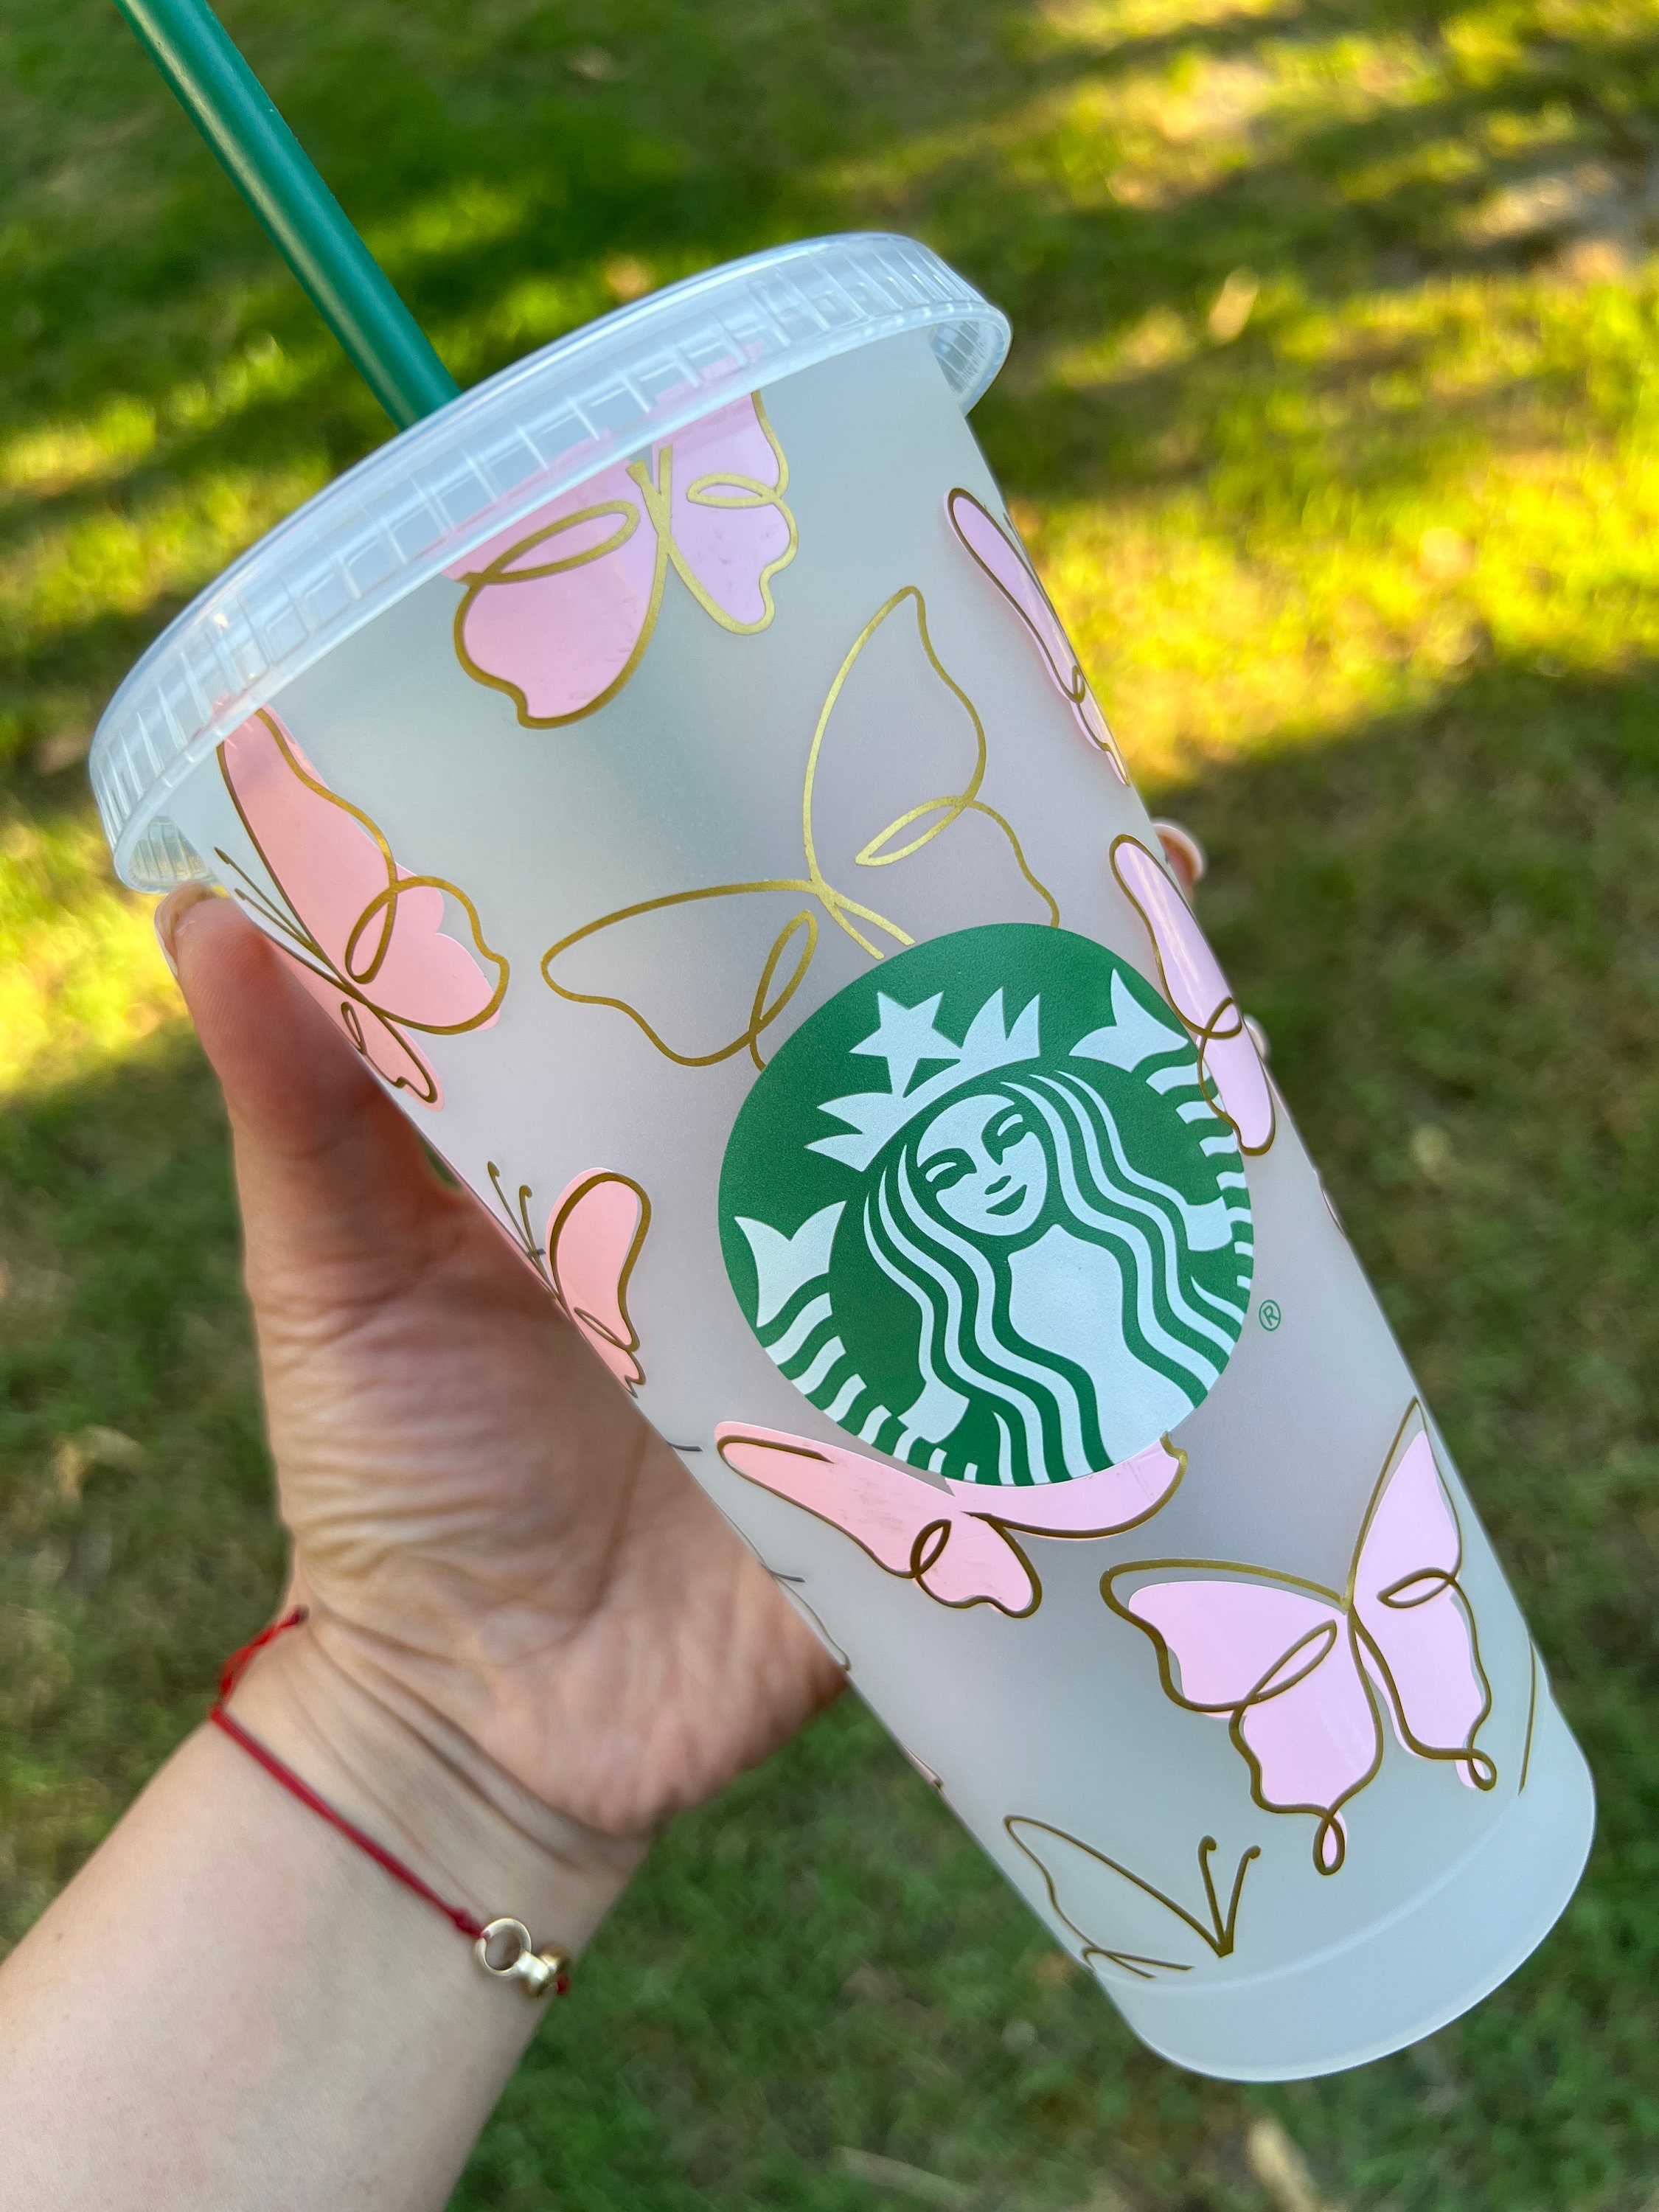 Starbucks, Dining, Customized Butterfly Starbucks Cold Cup